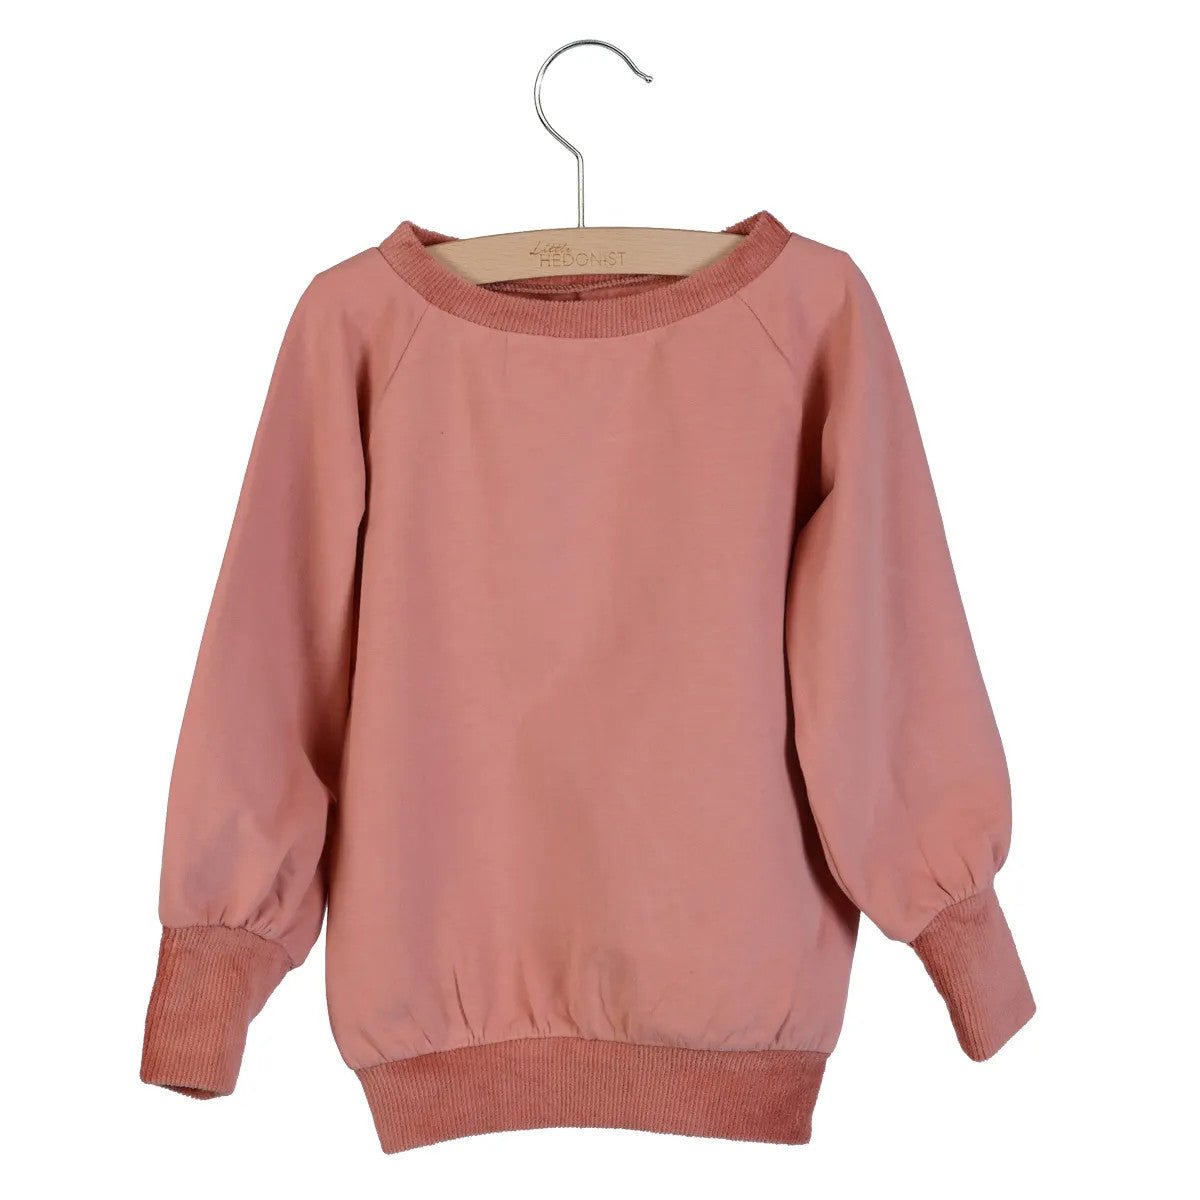 Little Hedonist organic long cuff sweater in Old Rose